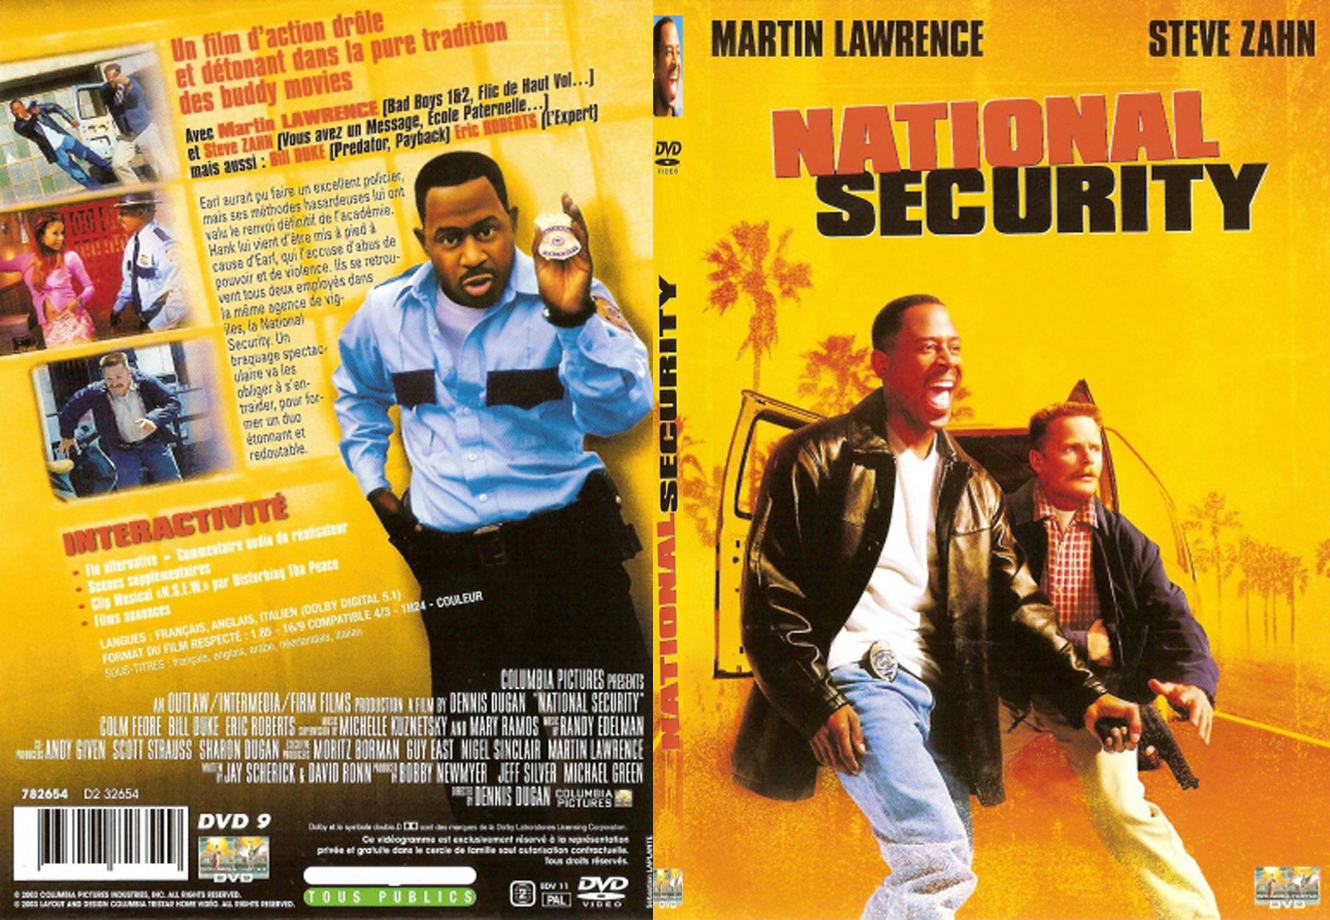 Jaquette DVD National security - SLIM